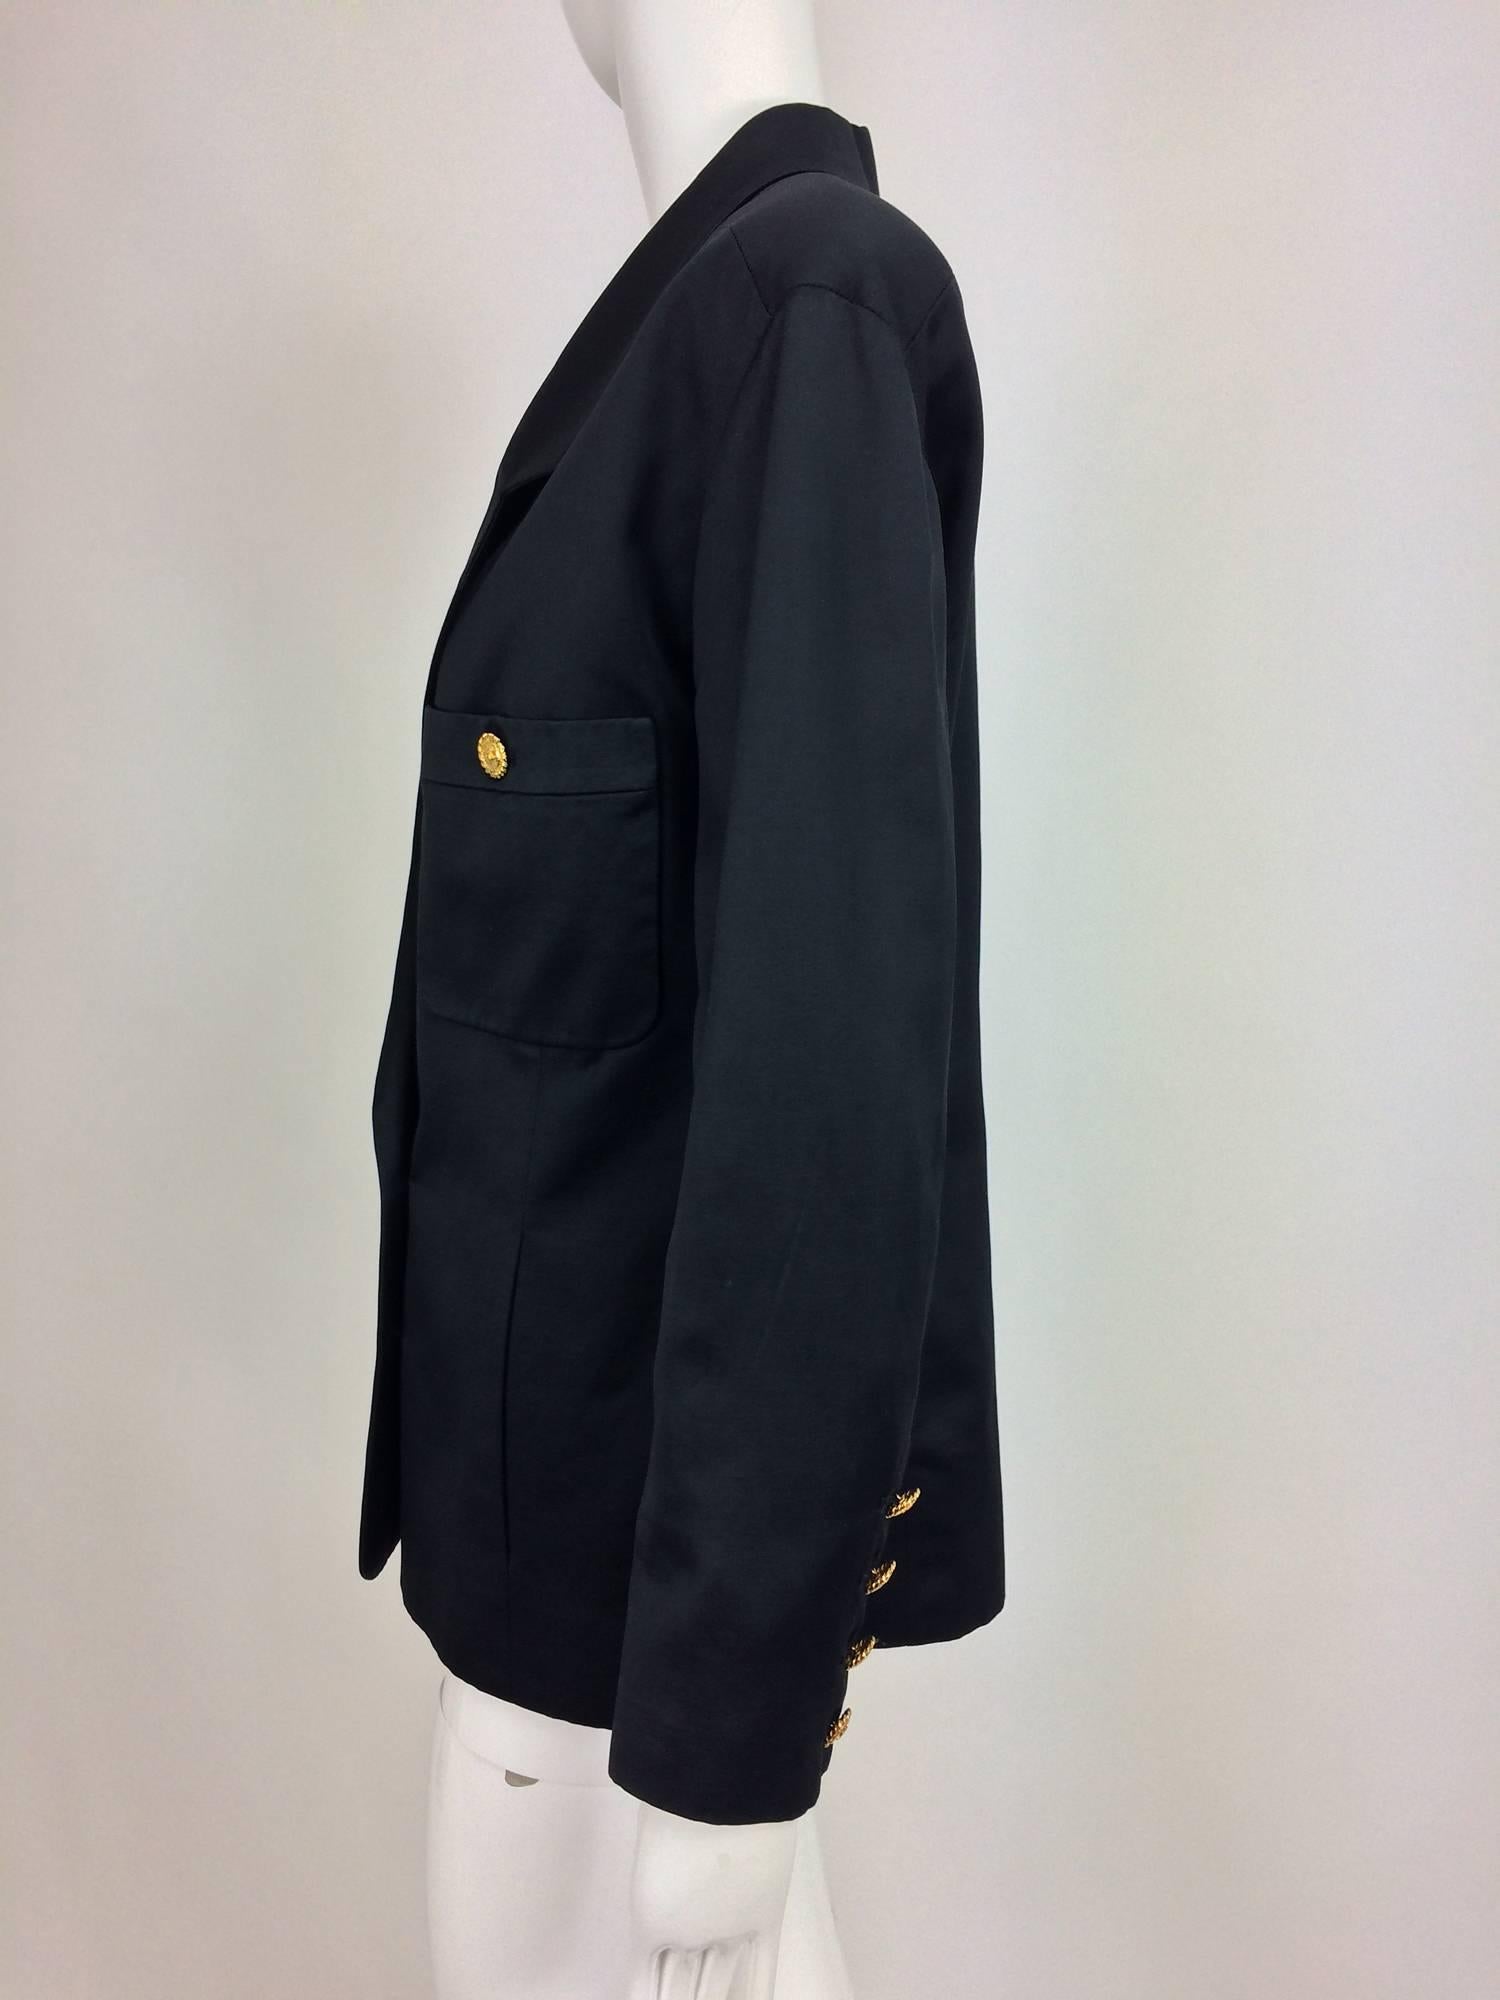 Chanel black silk military style pea coat/jacket...Double breasted with gold Chanel buttons...Patch breast pockets with gold Chanel buttons and vertical front seam hand warmer pockets at the lower front...Hip length with slight waist shaping...4